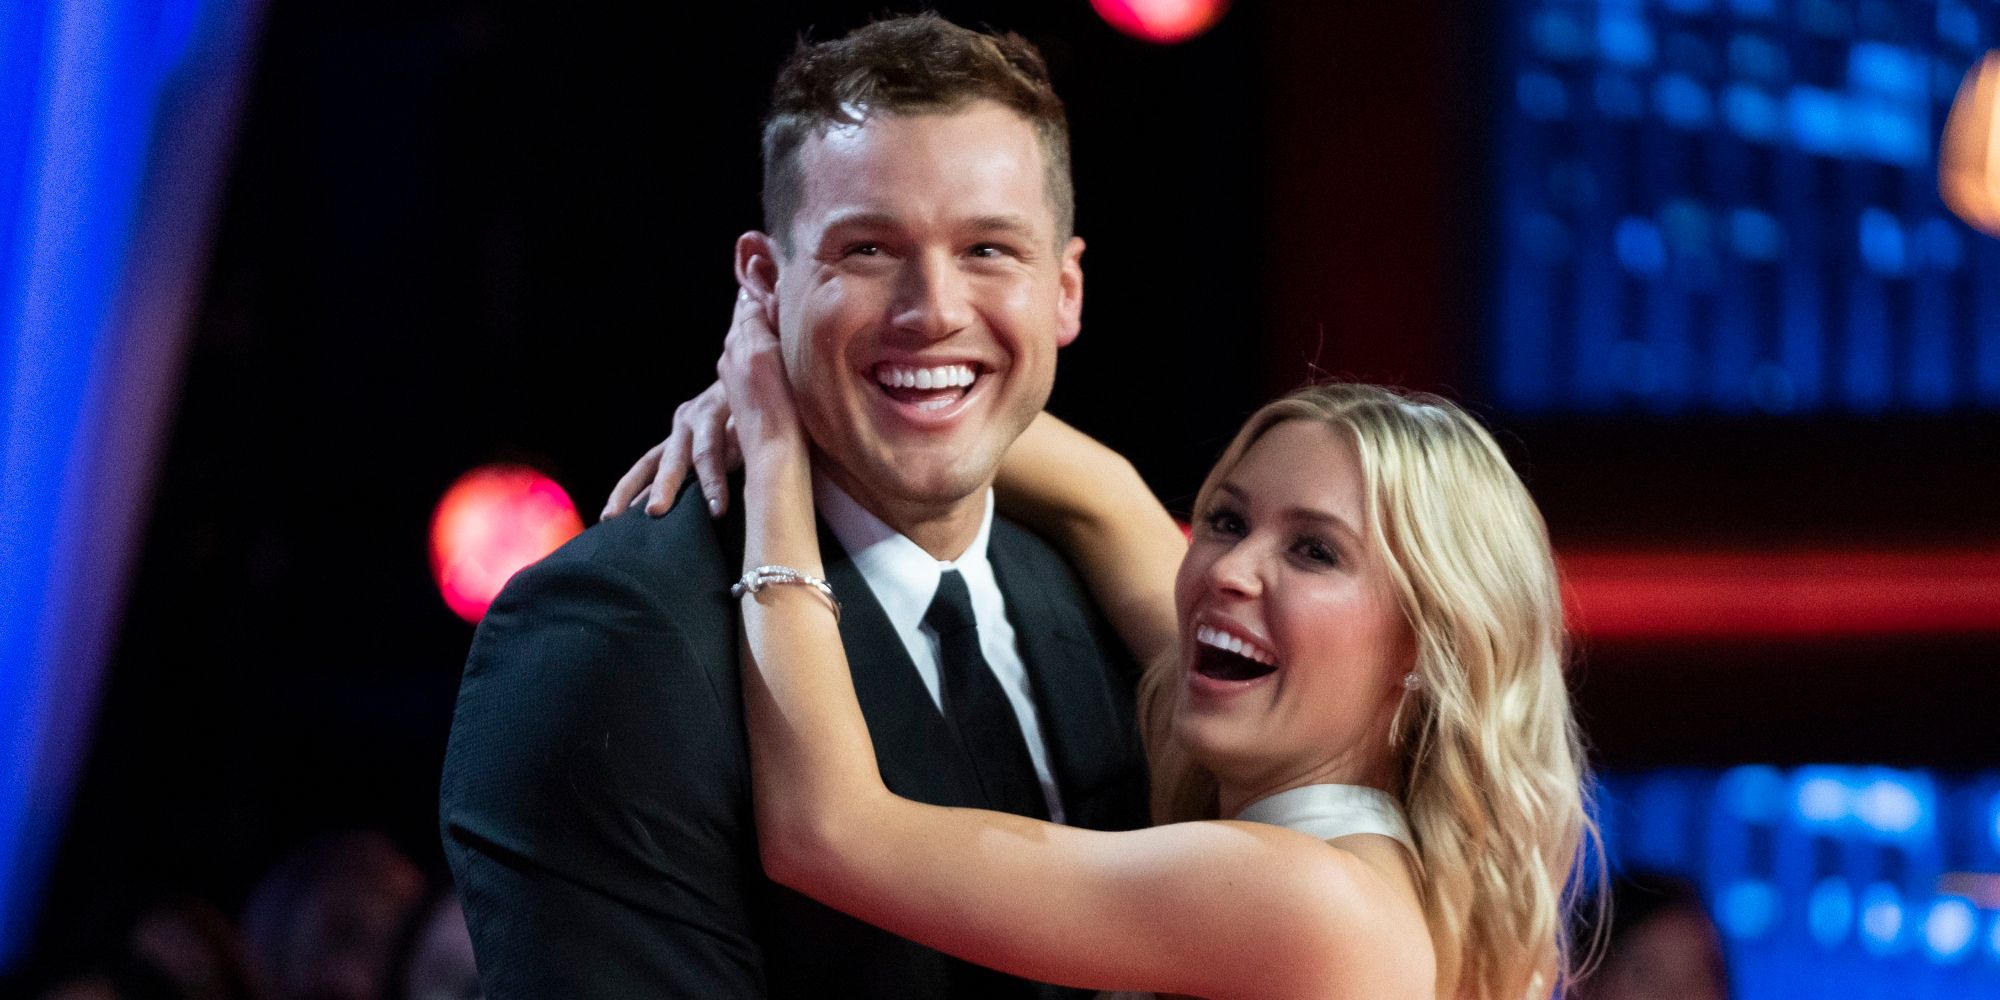 Colton Underwood and his final pick Cassie Randolph in Season 23 of The Bachelor